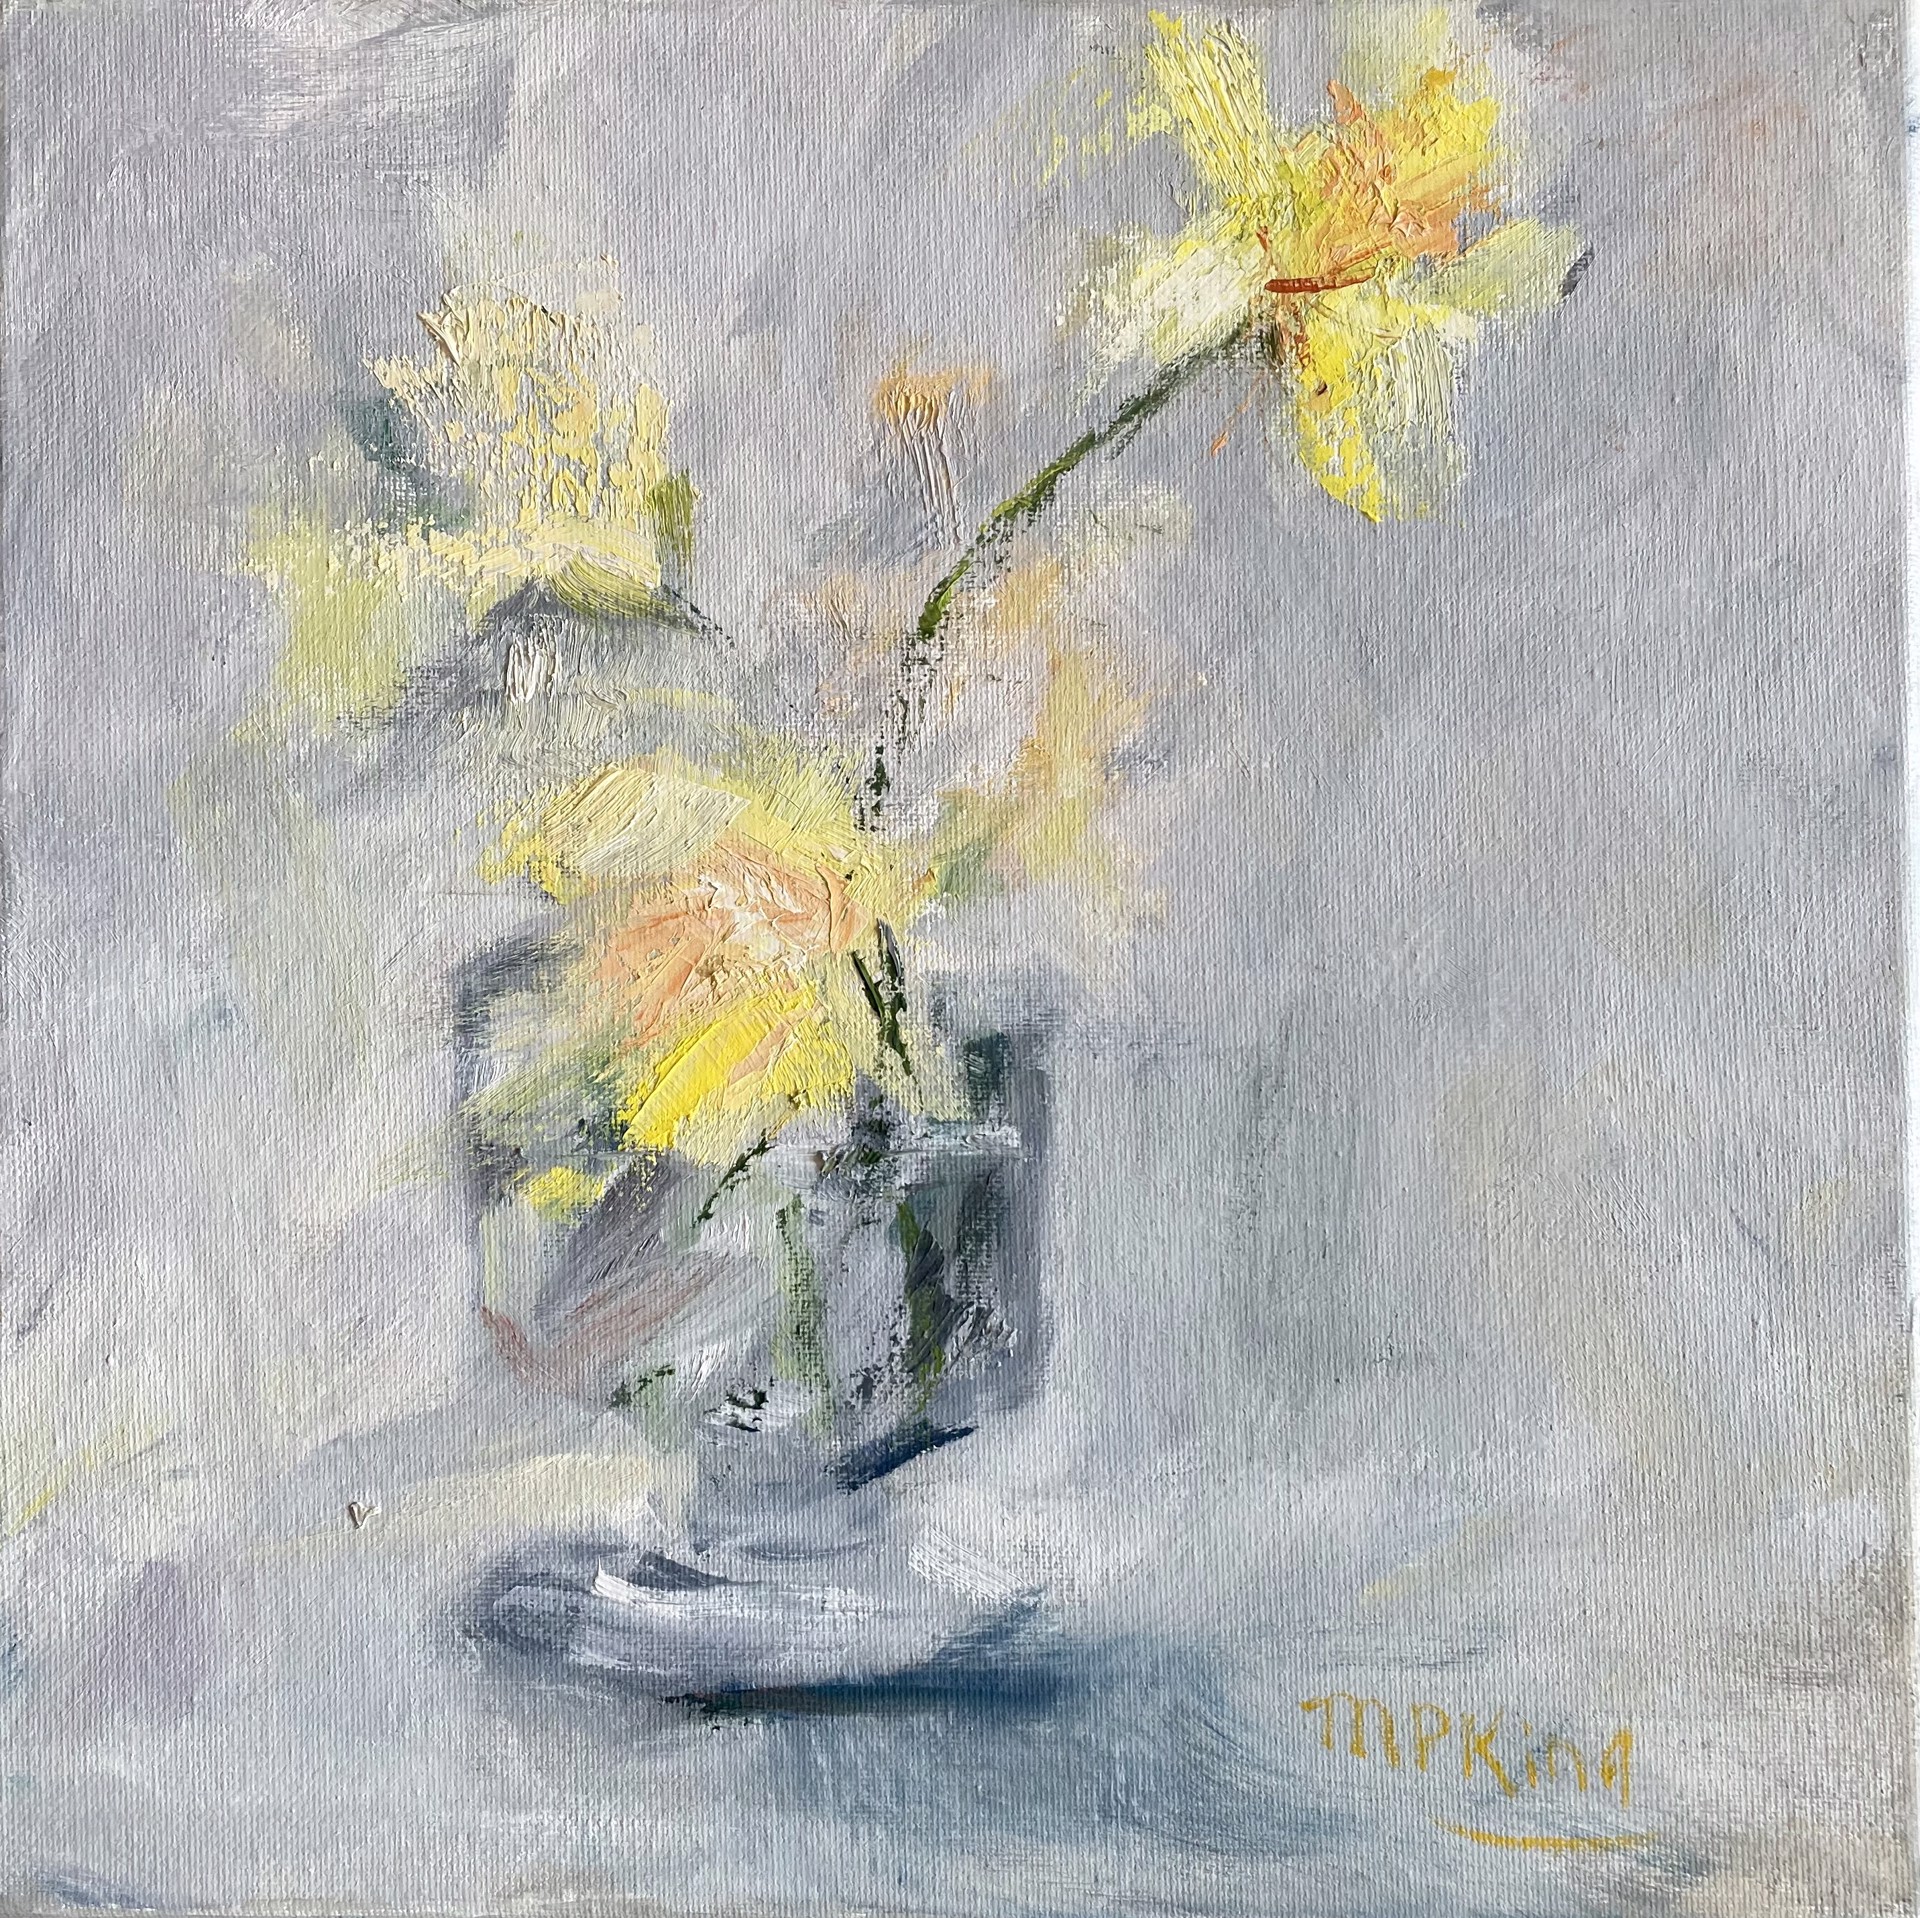 Daffodils by Mary Pat King